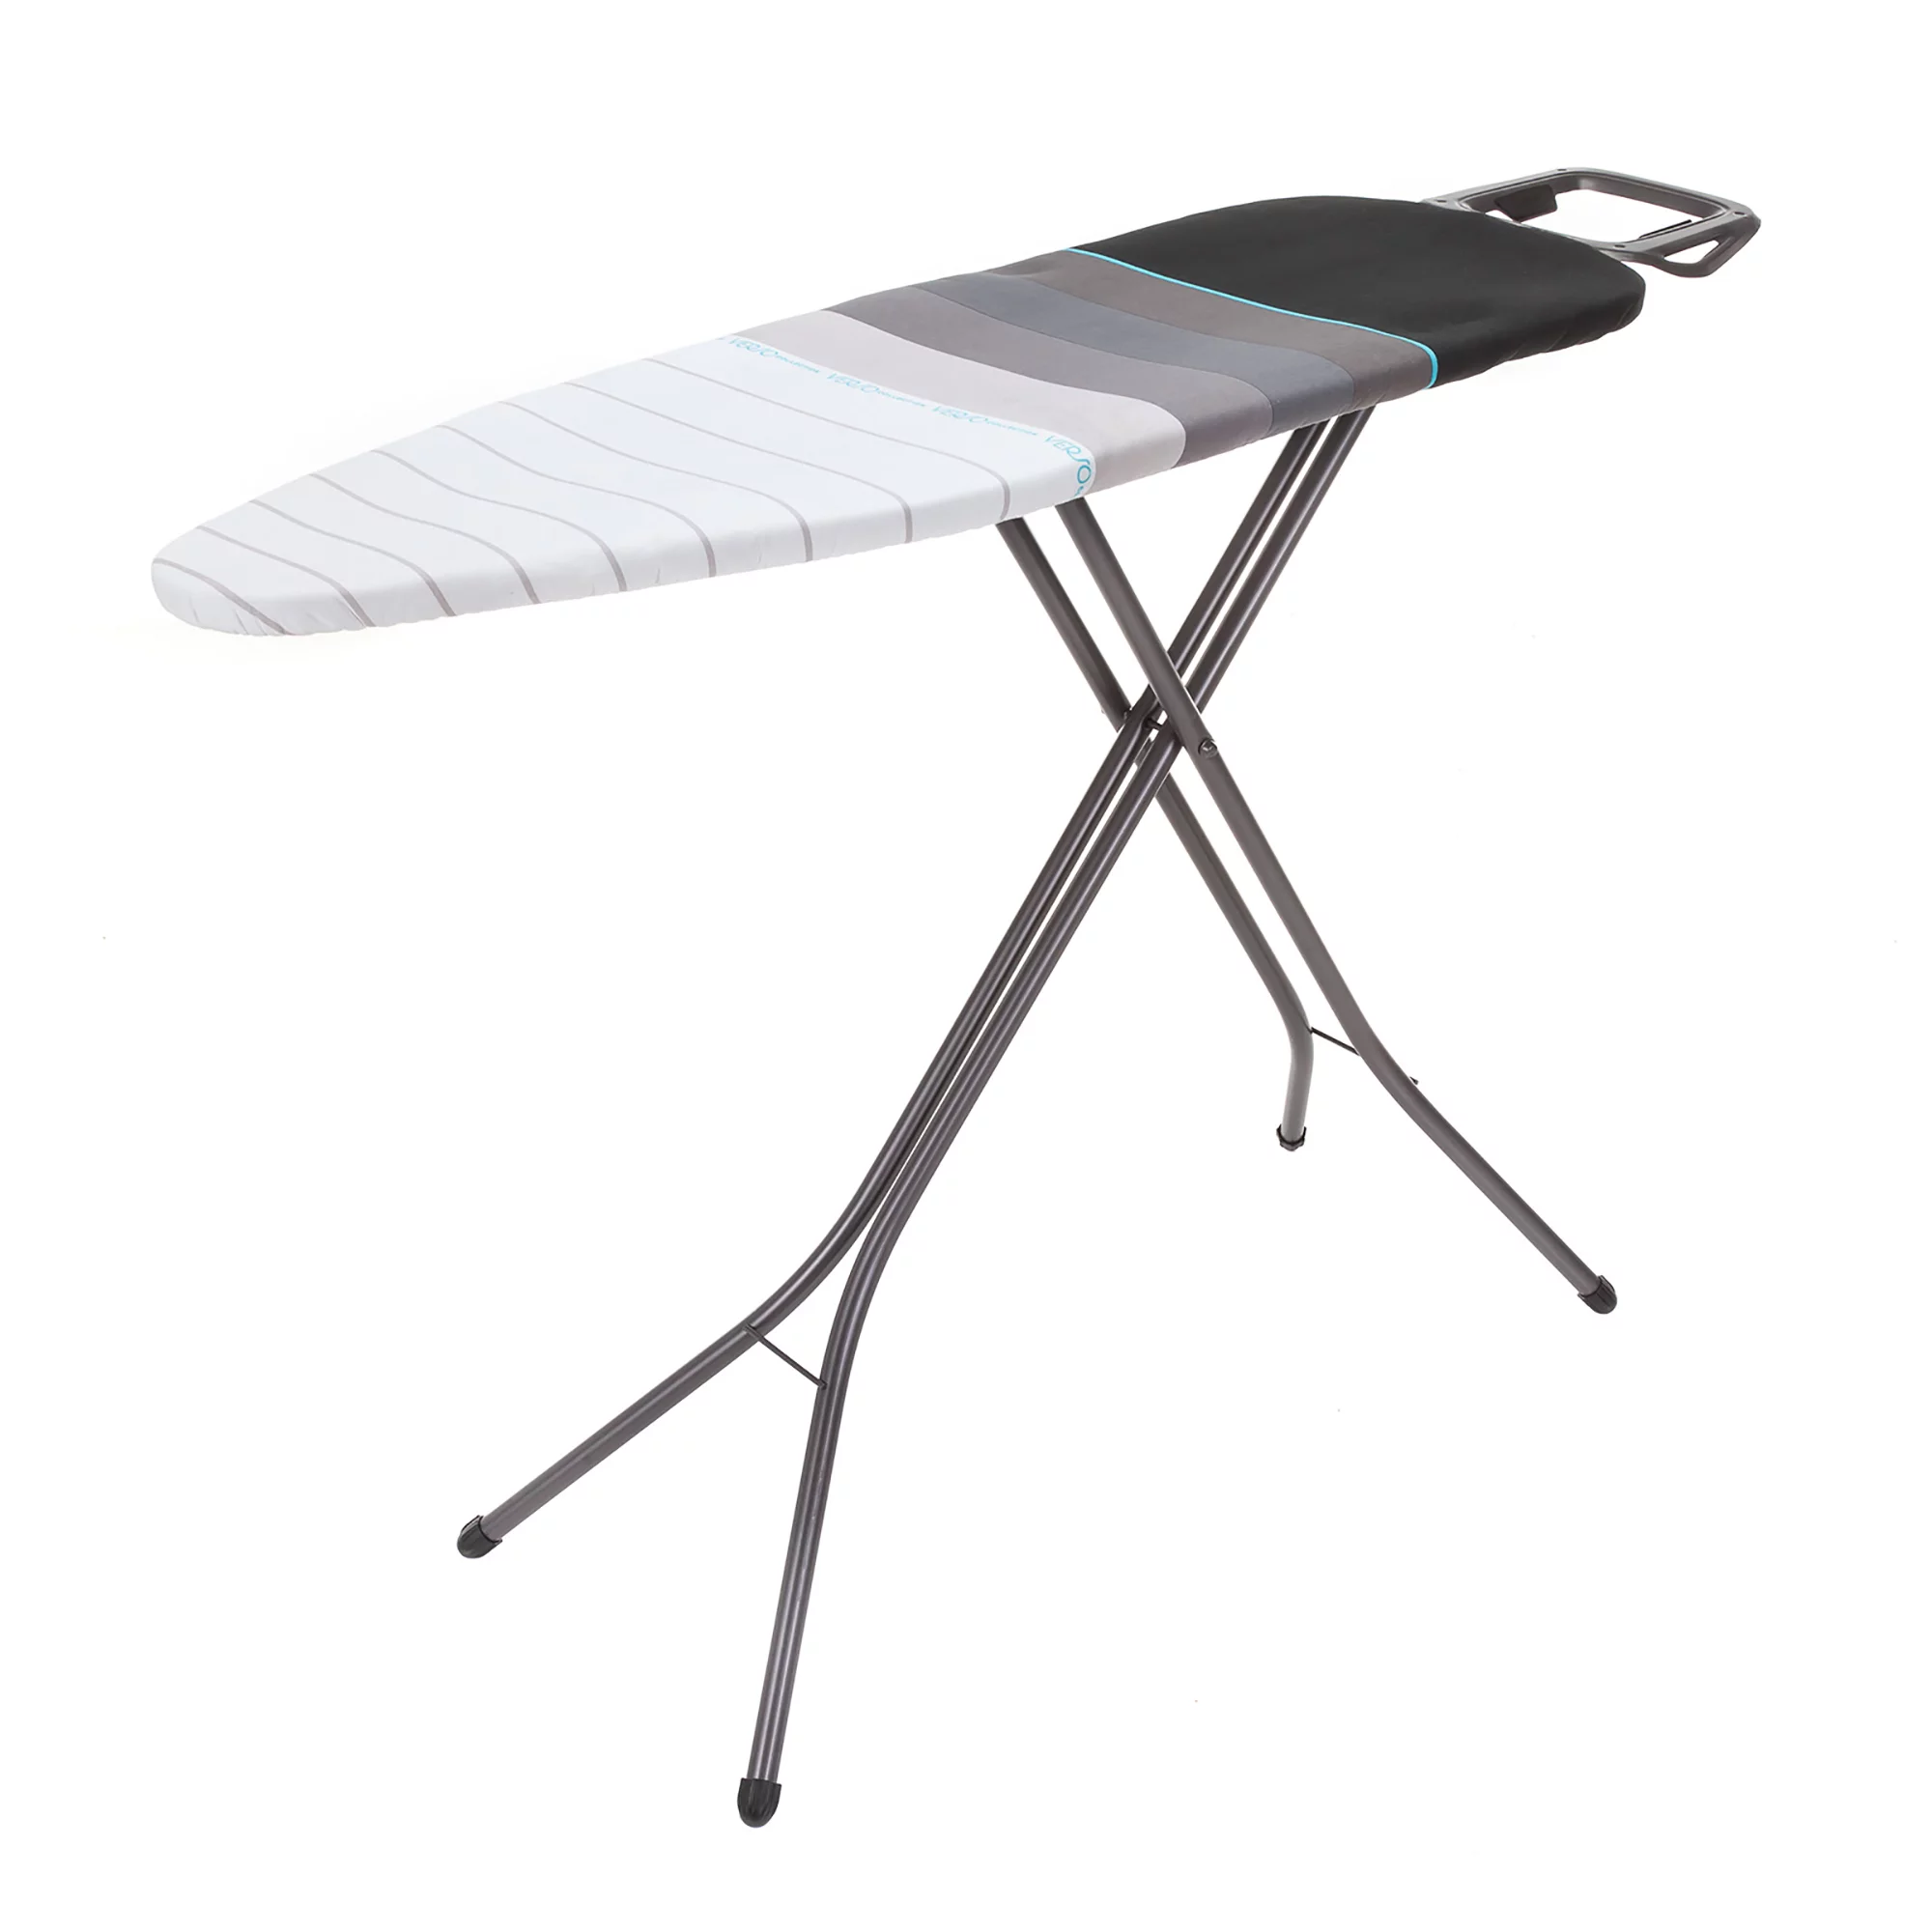 The Ironing Board Standing Desk converter